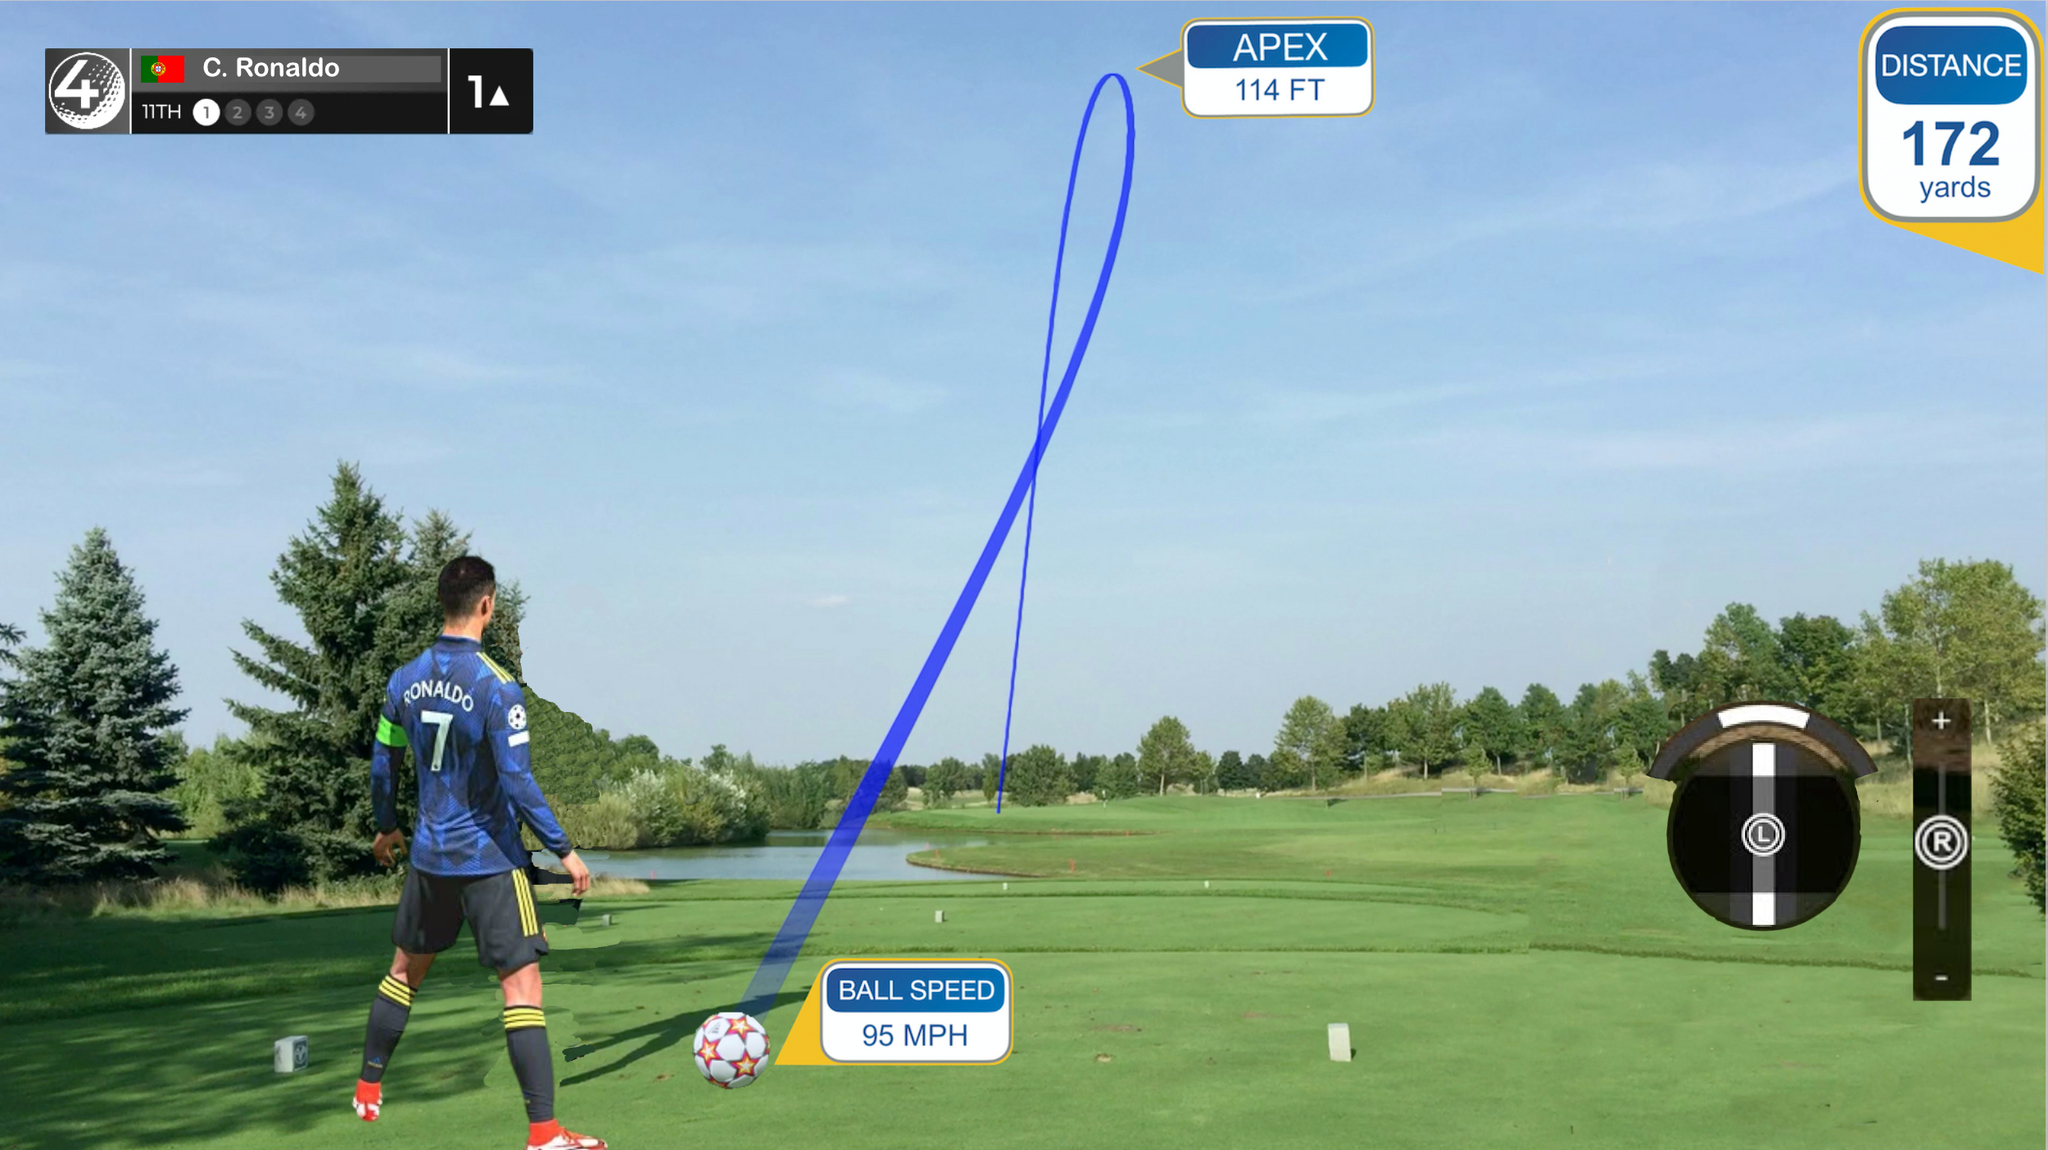 Cristiano Ronaldo gets ready to take a tee shot in a mockup of what FootGolf could look like on EA Sports FIFA23. - MARCA